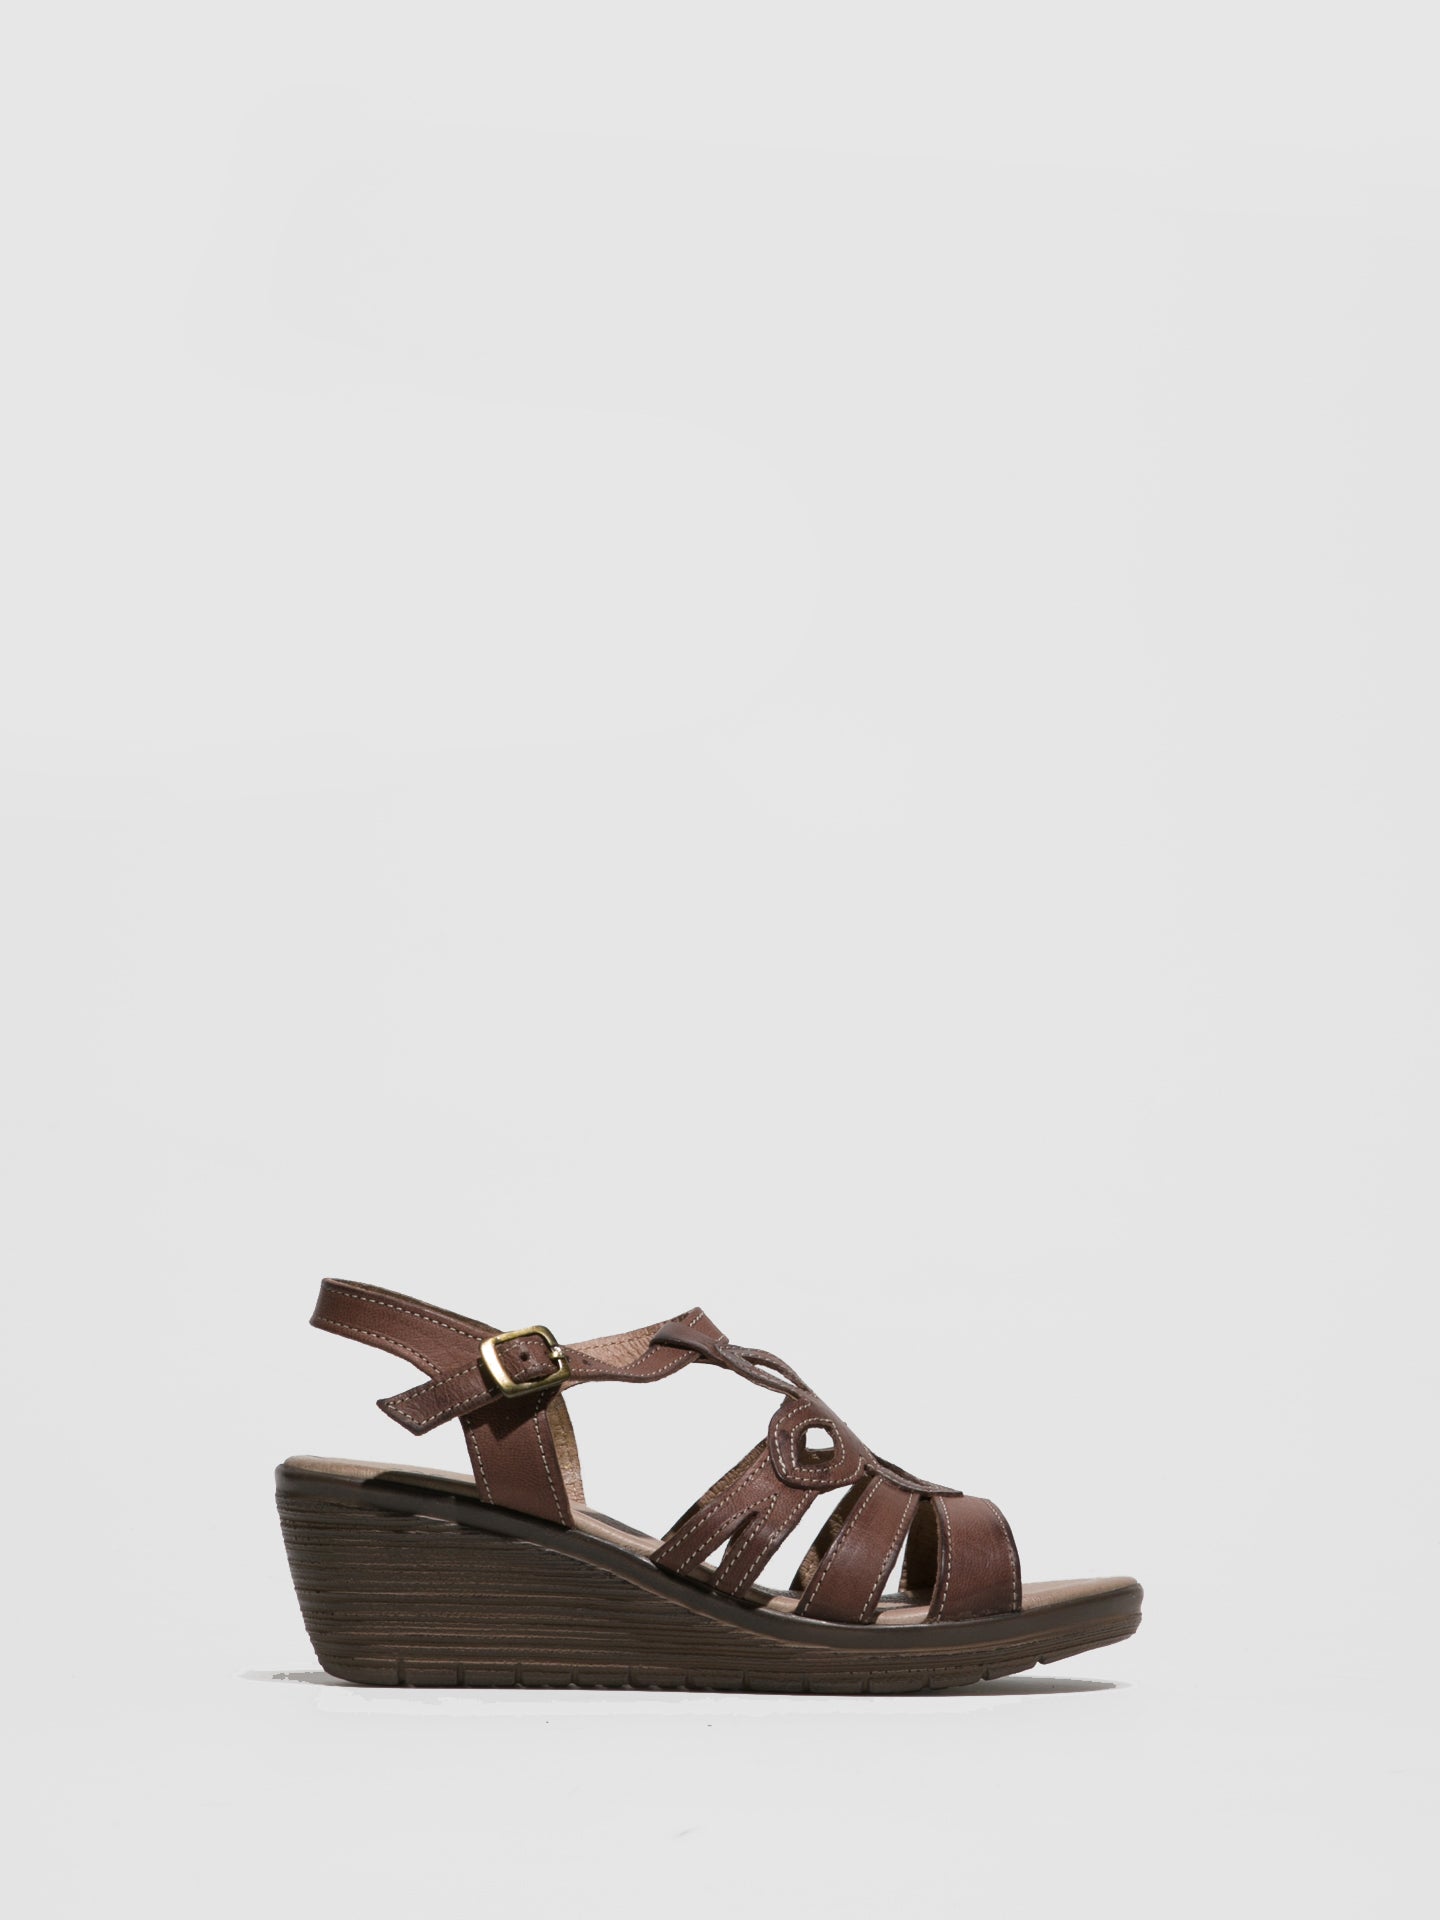 Foreva Brown Strappy Sandals